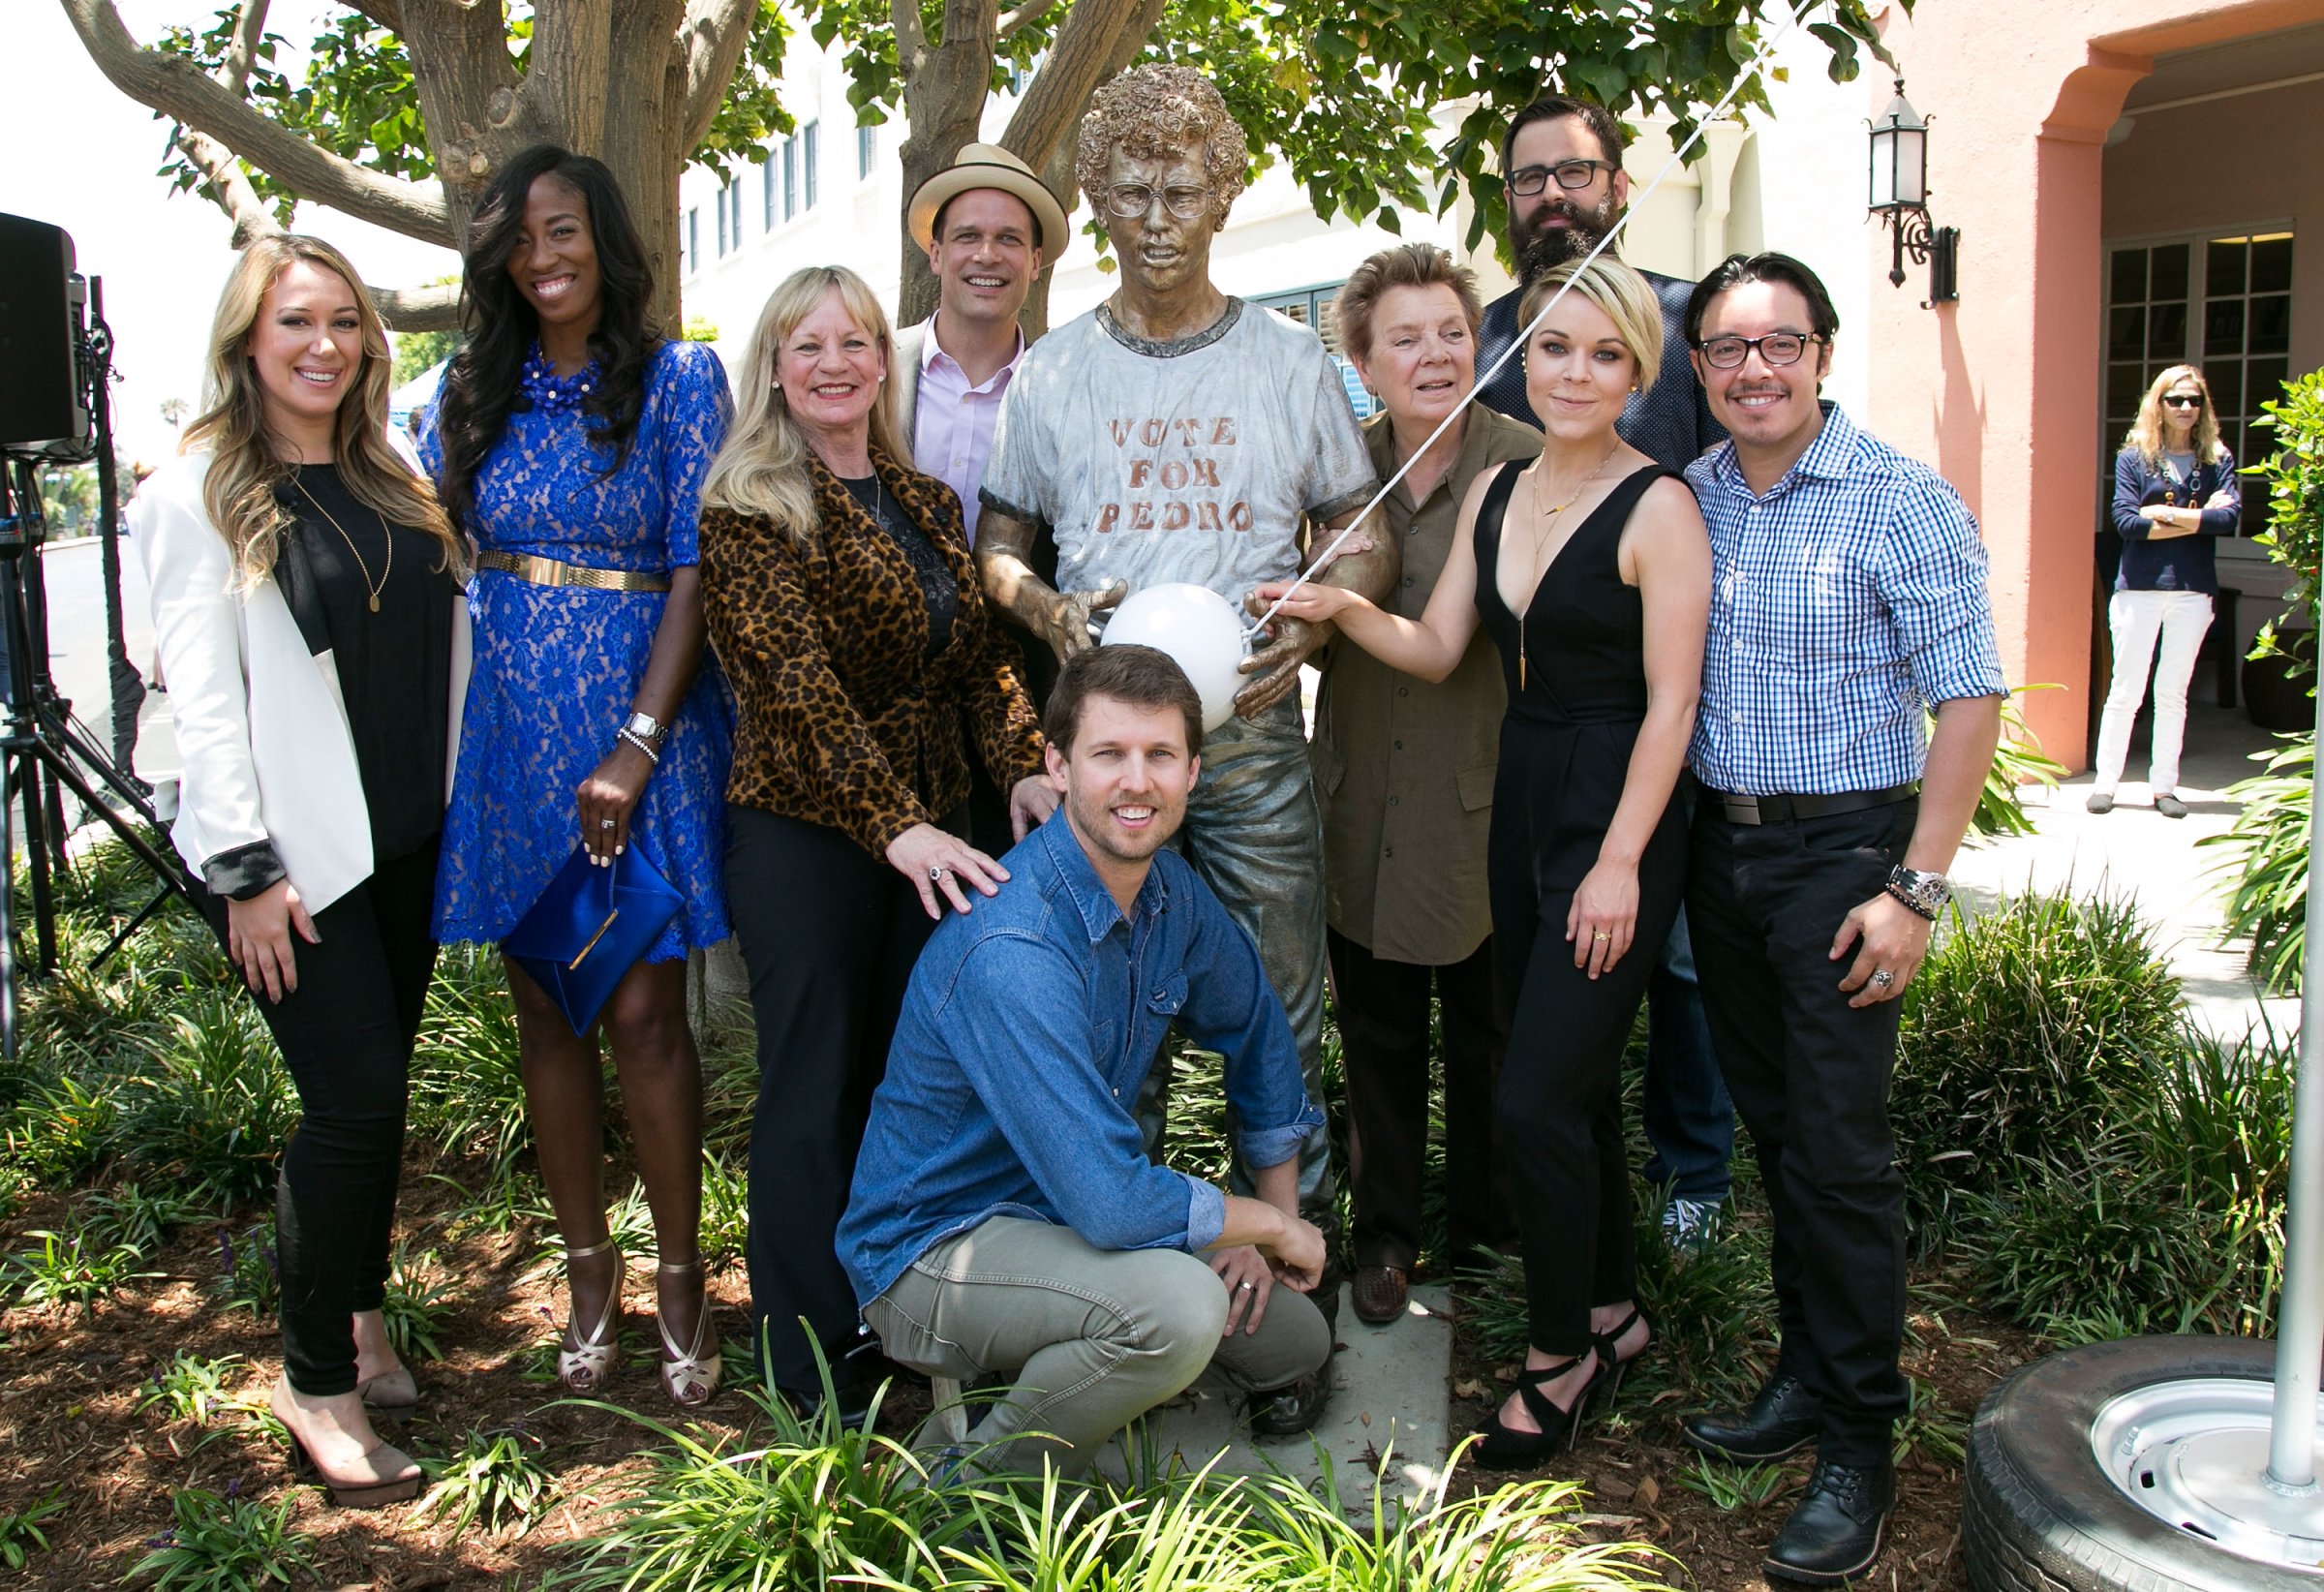 "Napoleon Dynamite" 10 Sweet Years Edition Blu-Ray/DVD Release And Statue Dedication